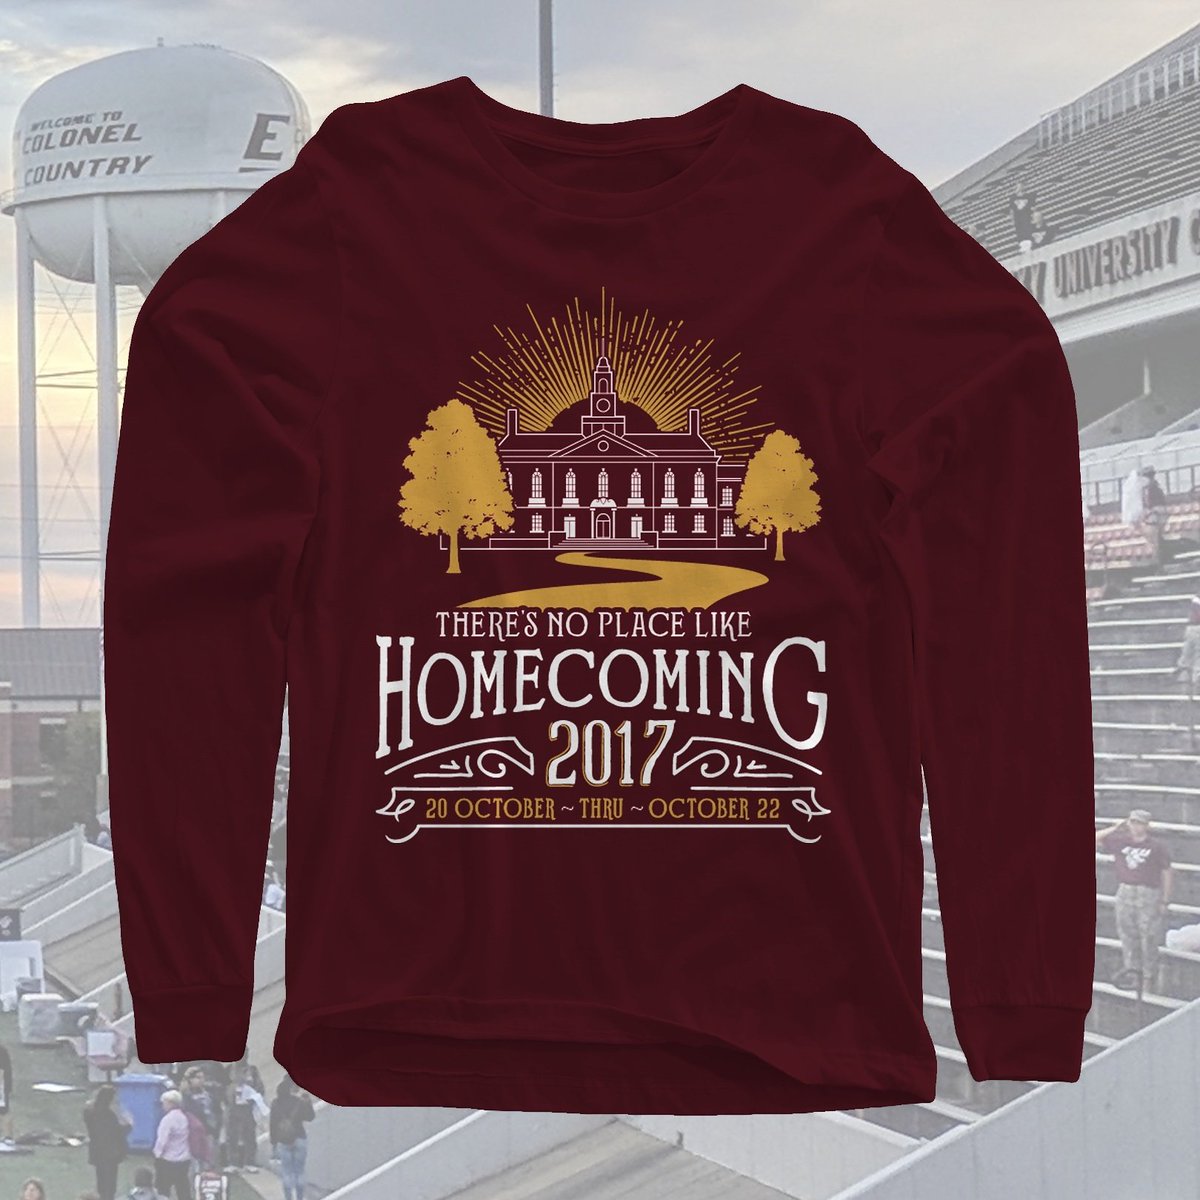  T Shirt Design For Alumni Homecoming Review Home Decor